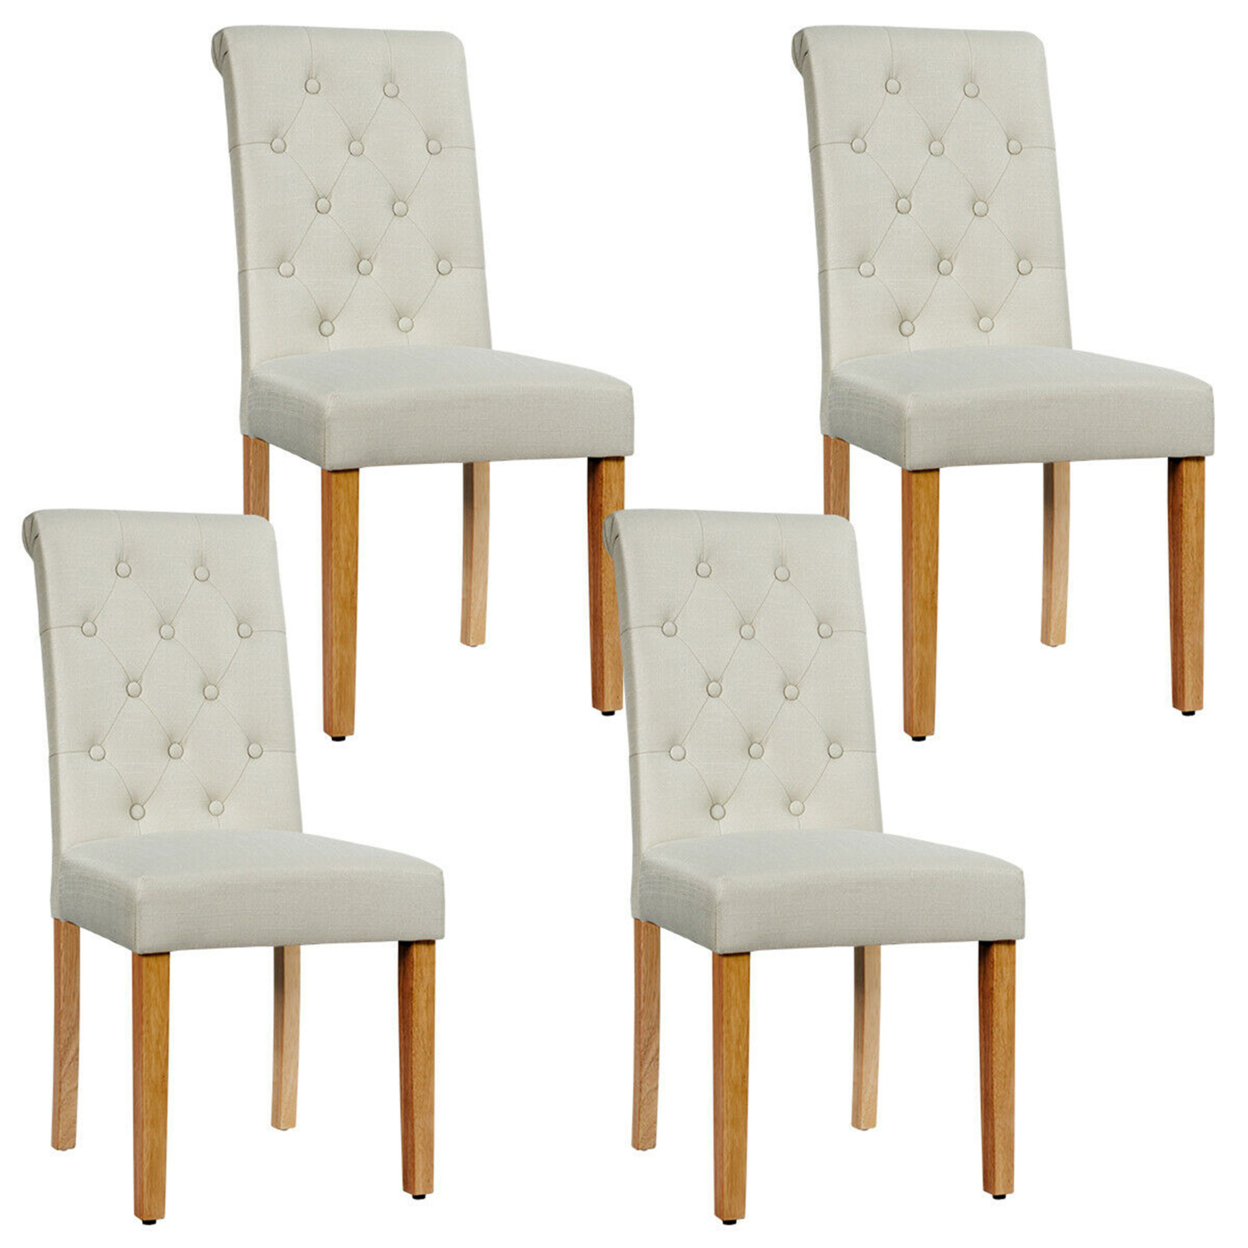 4PCS Upholstered Dining Chair High Back Armless Chair W/ Wooden Legs Beige